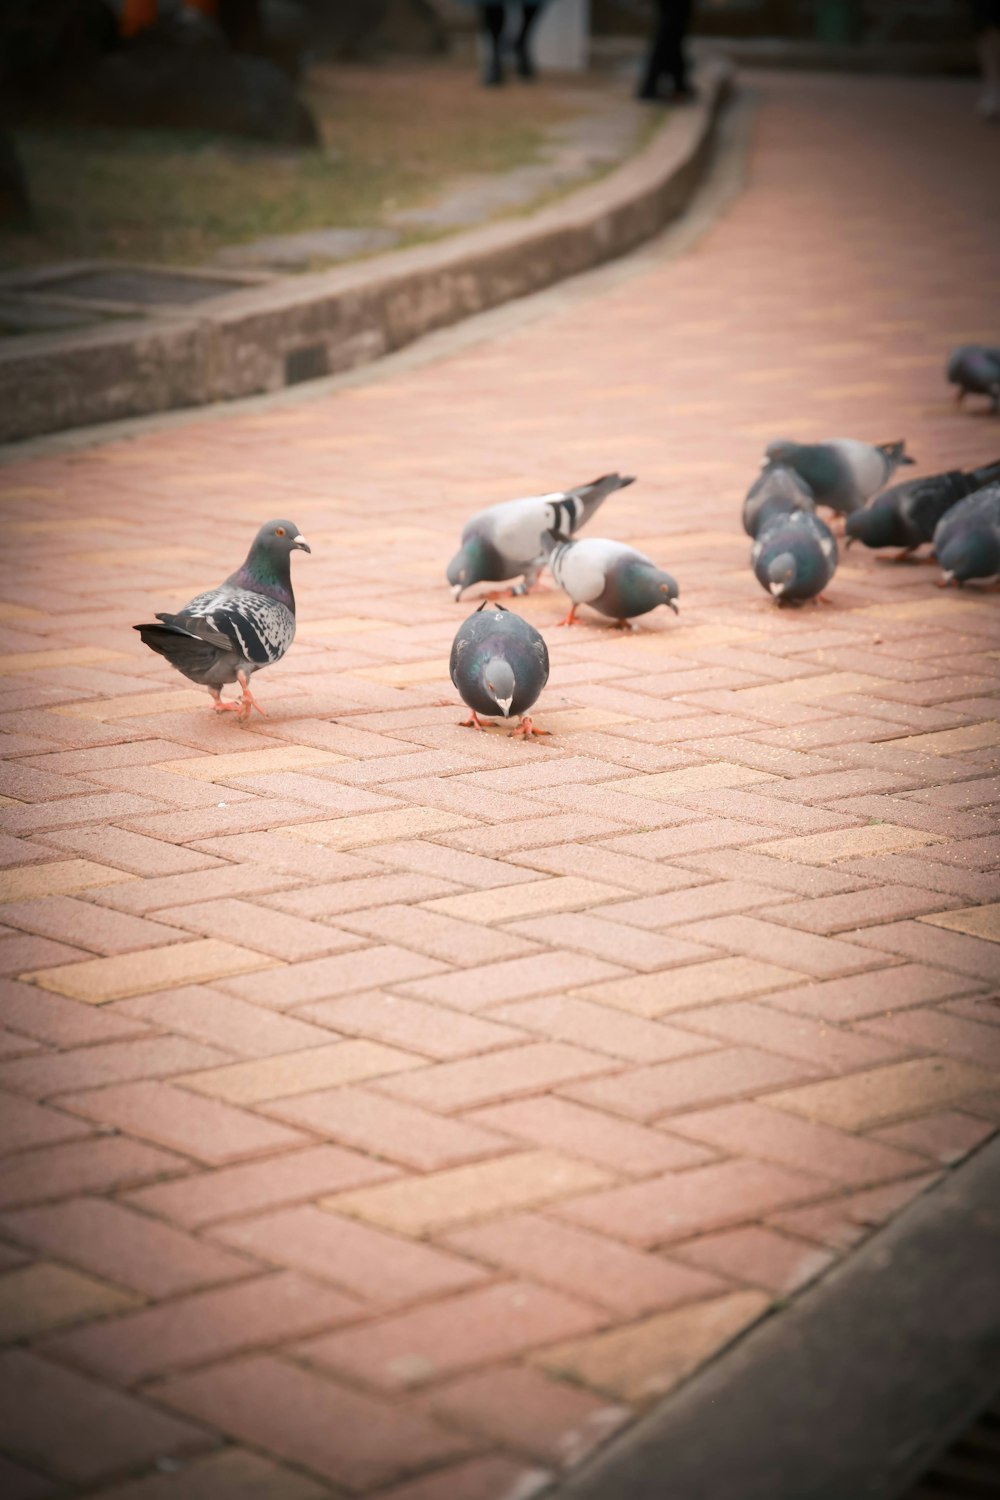 a flock of pigeons standing on a brick walkway